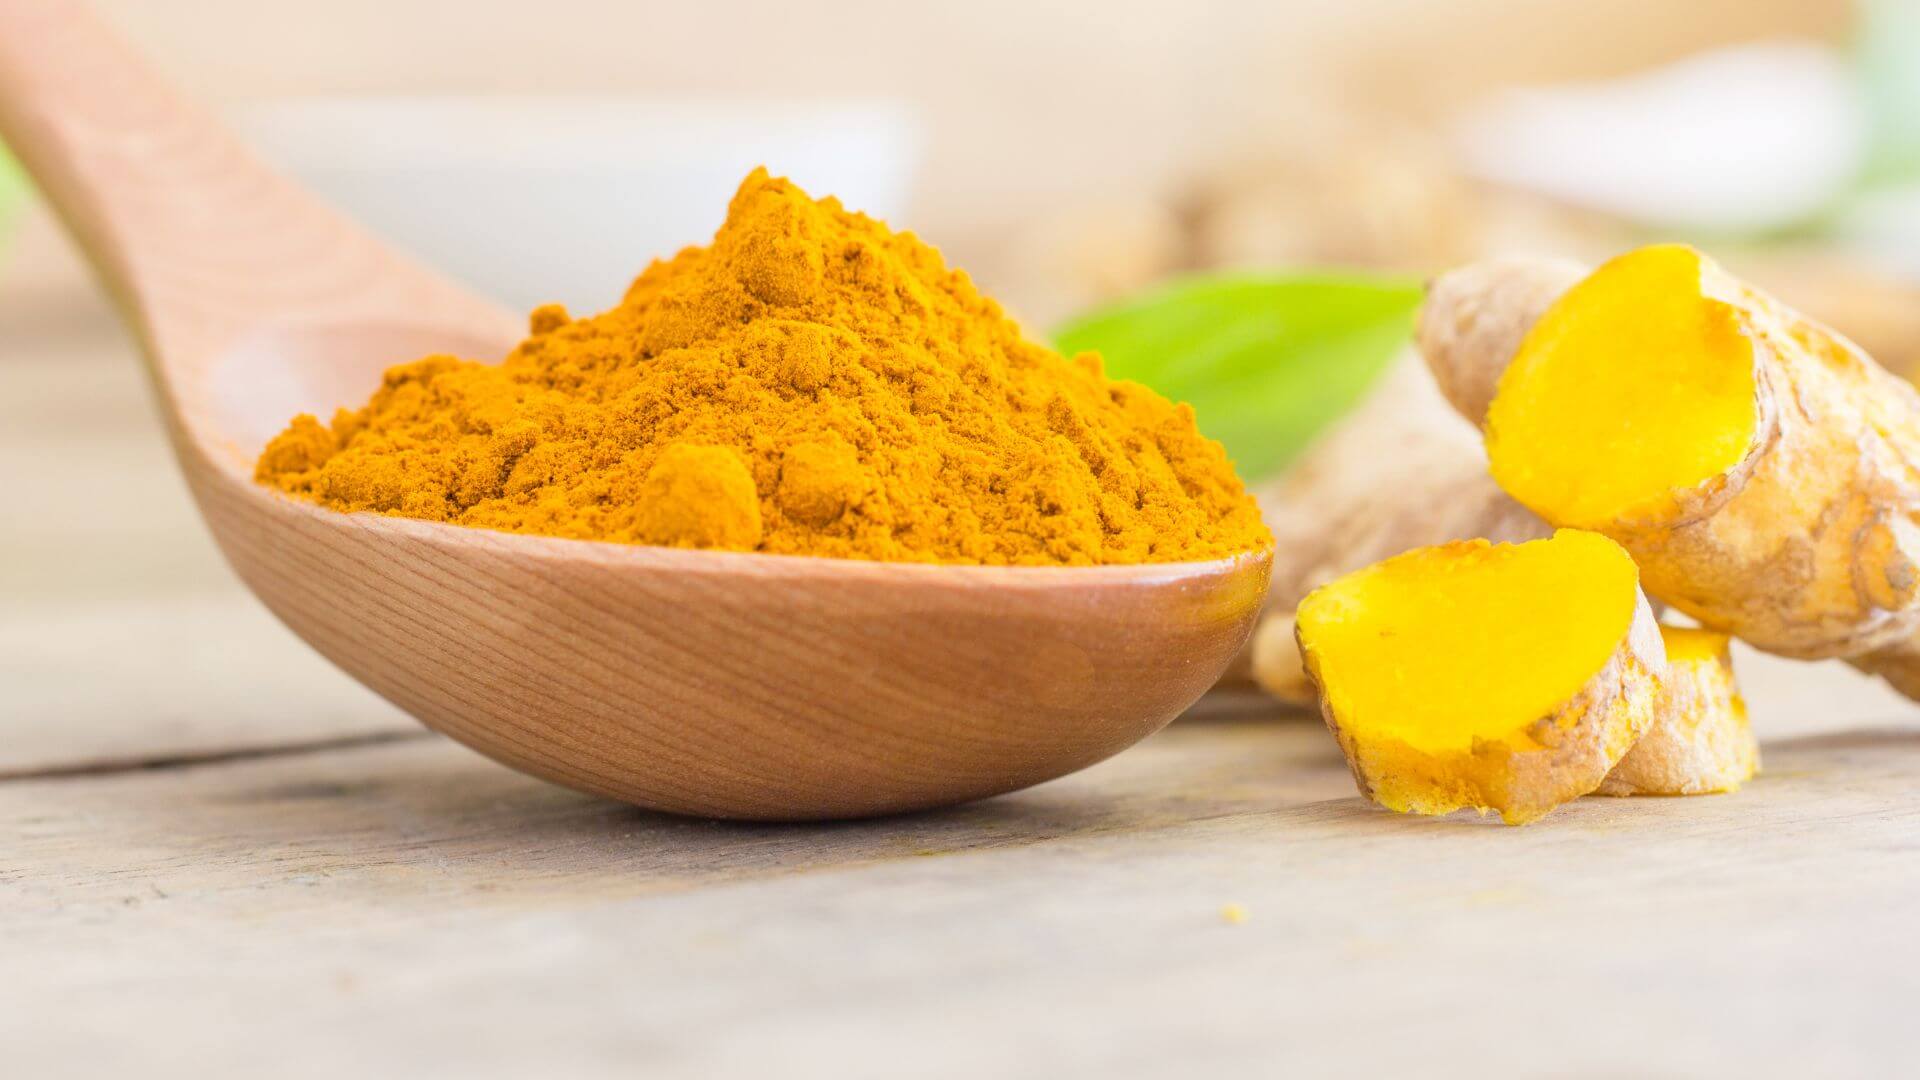 Where Does Turmeric Powder Come From?